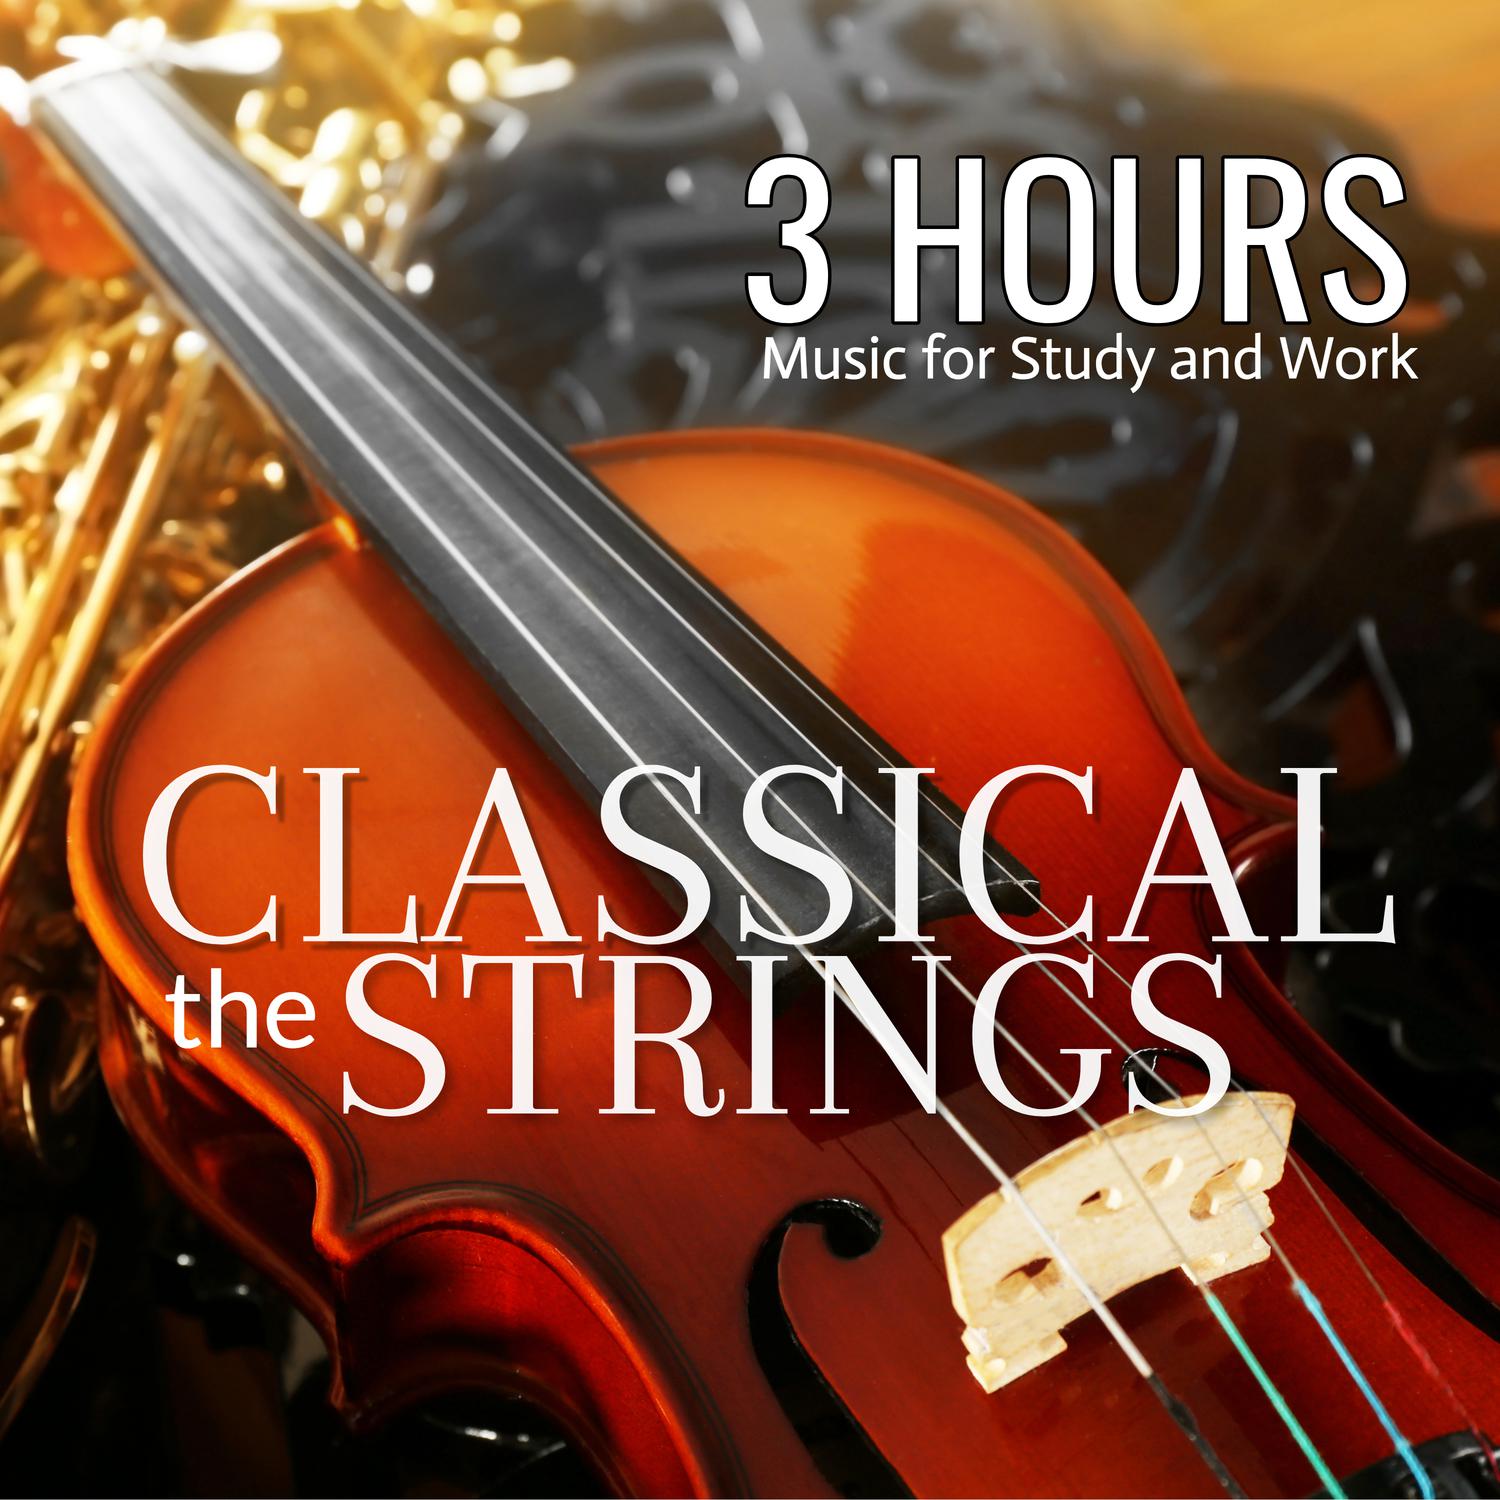 Classical Strings: 3 Hours of Music for Study and Work